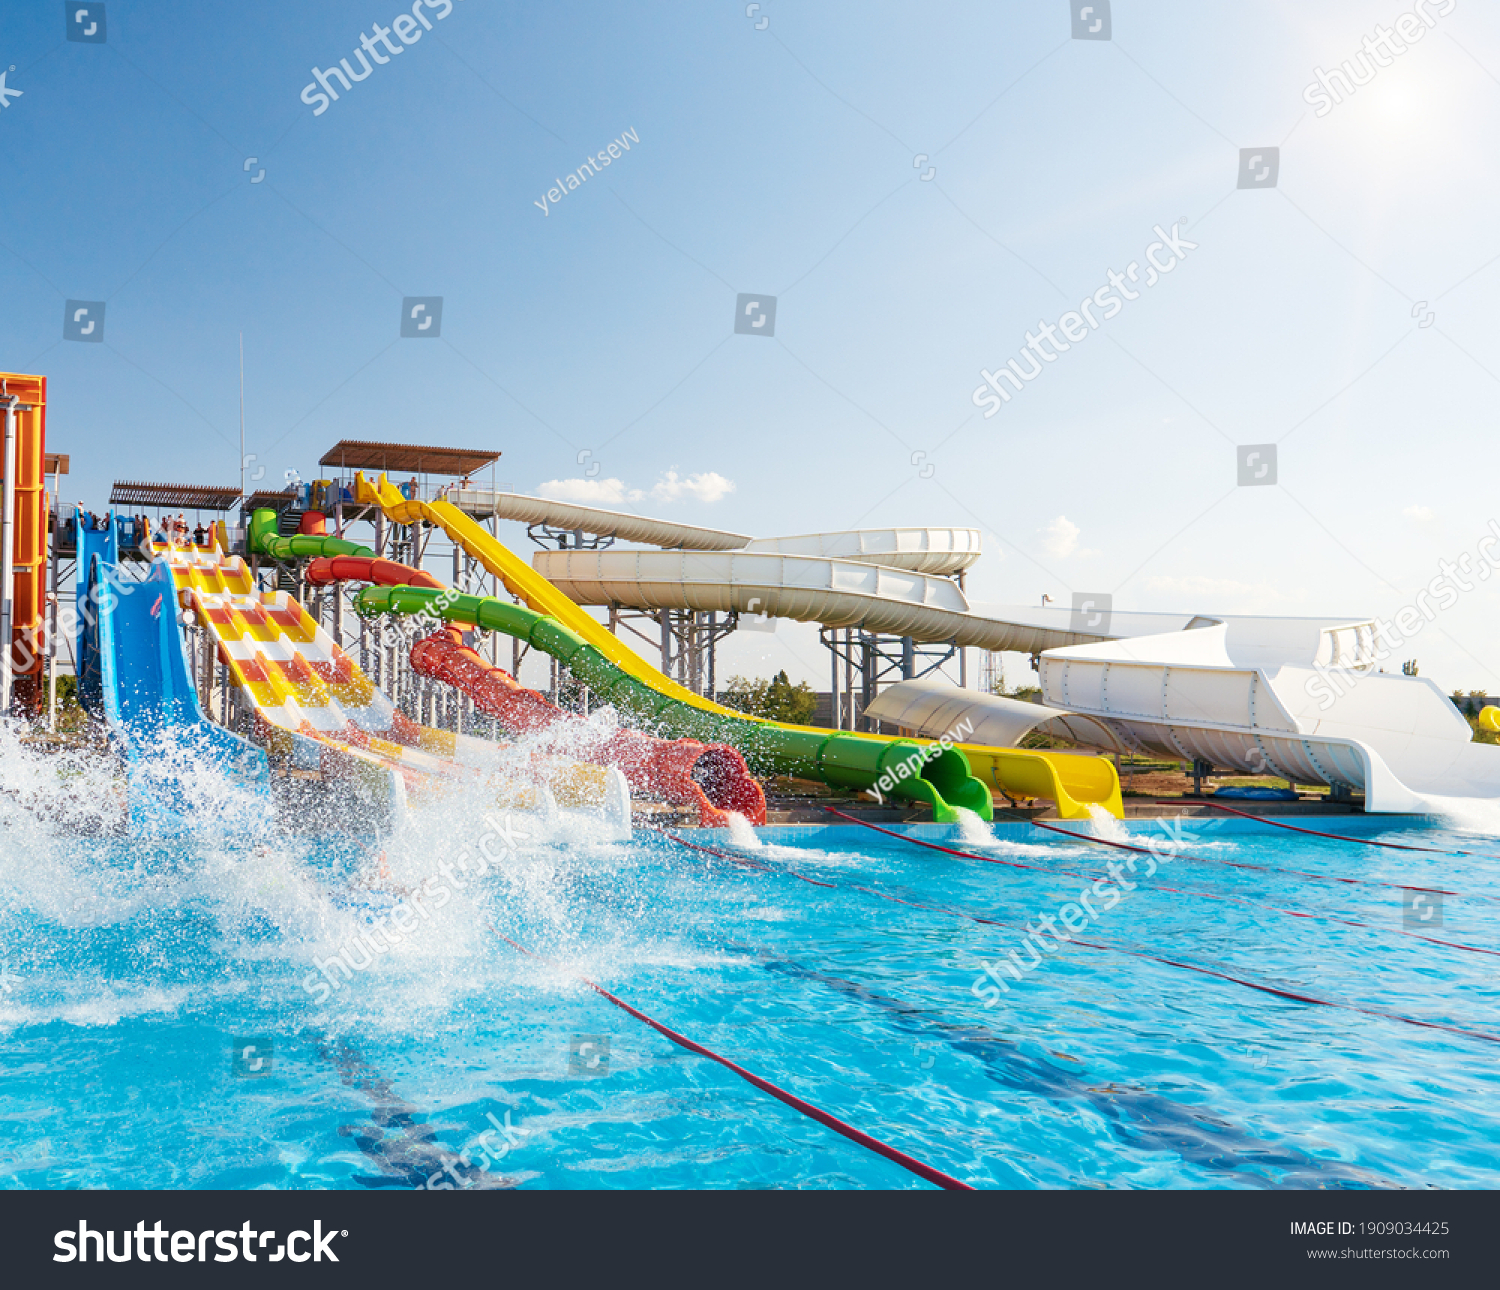 Water park, bright multi-colored slides with a pool. A water park without people on a summer day. #1909034425